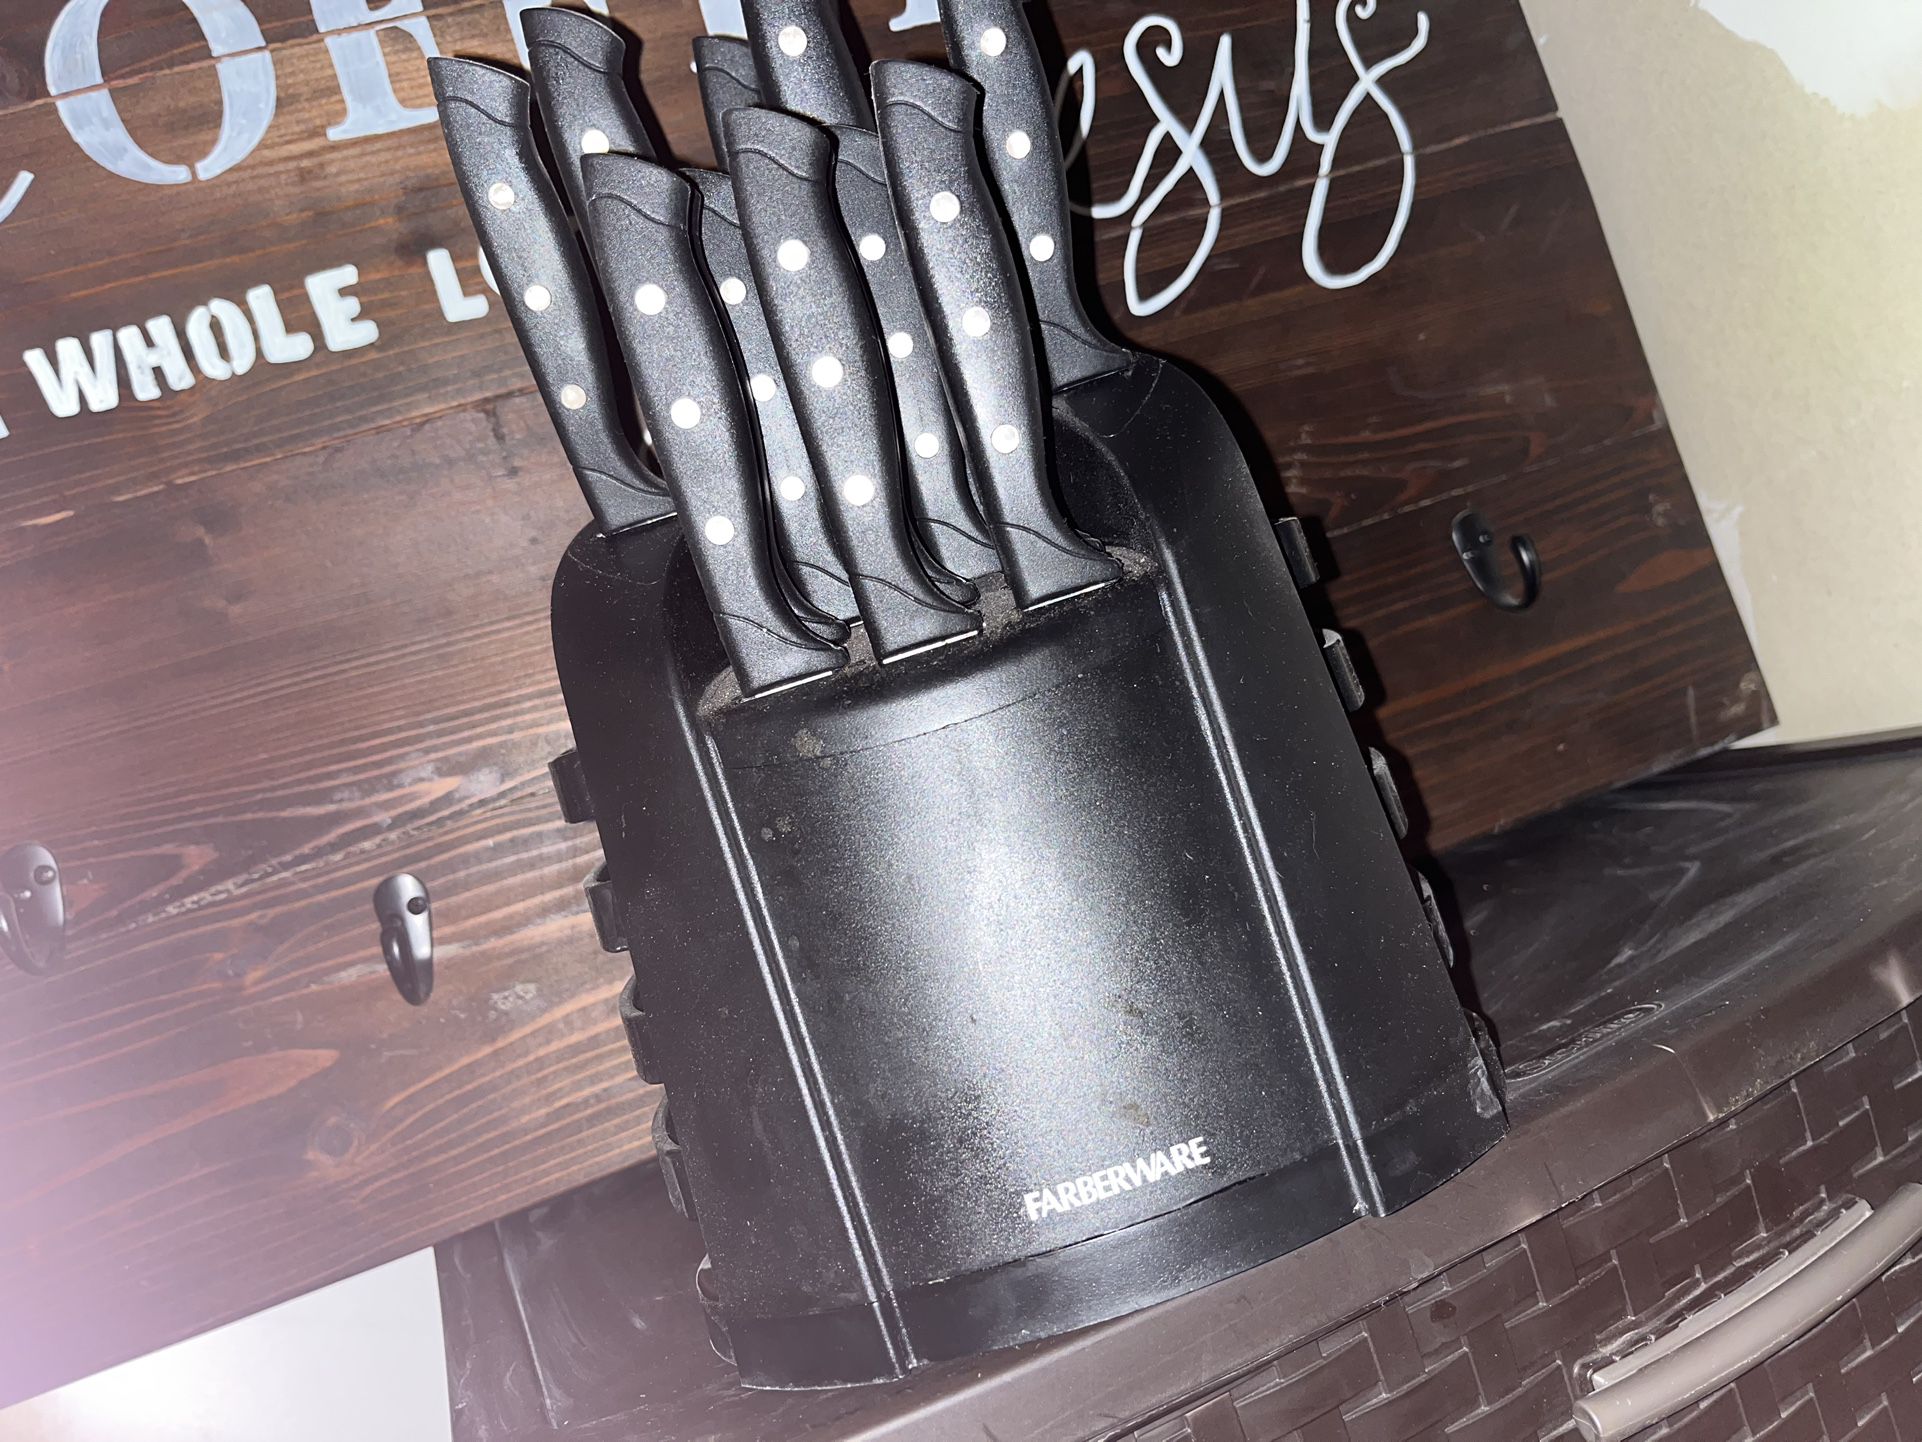 Farberware Knife Set 14 Pc for Sale in Somerset, TX - OfferUp